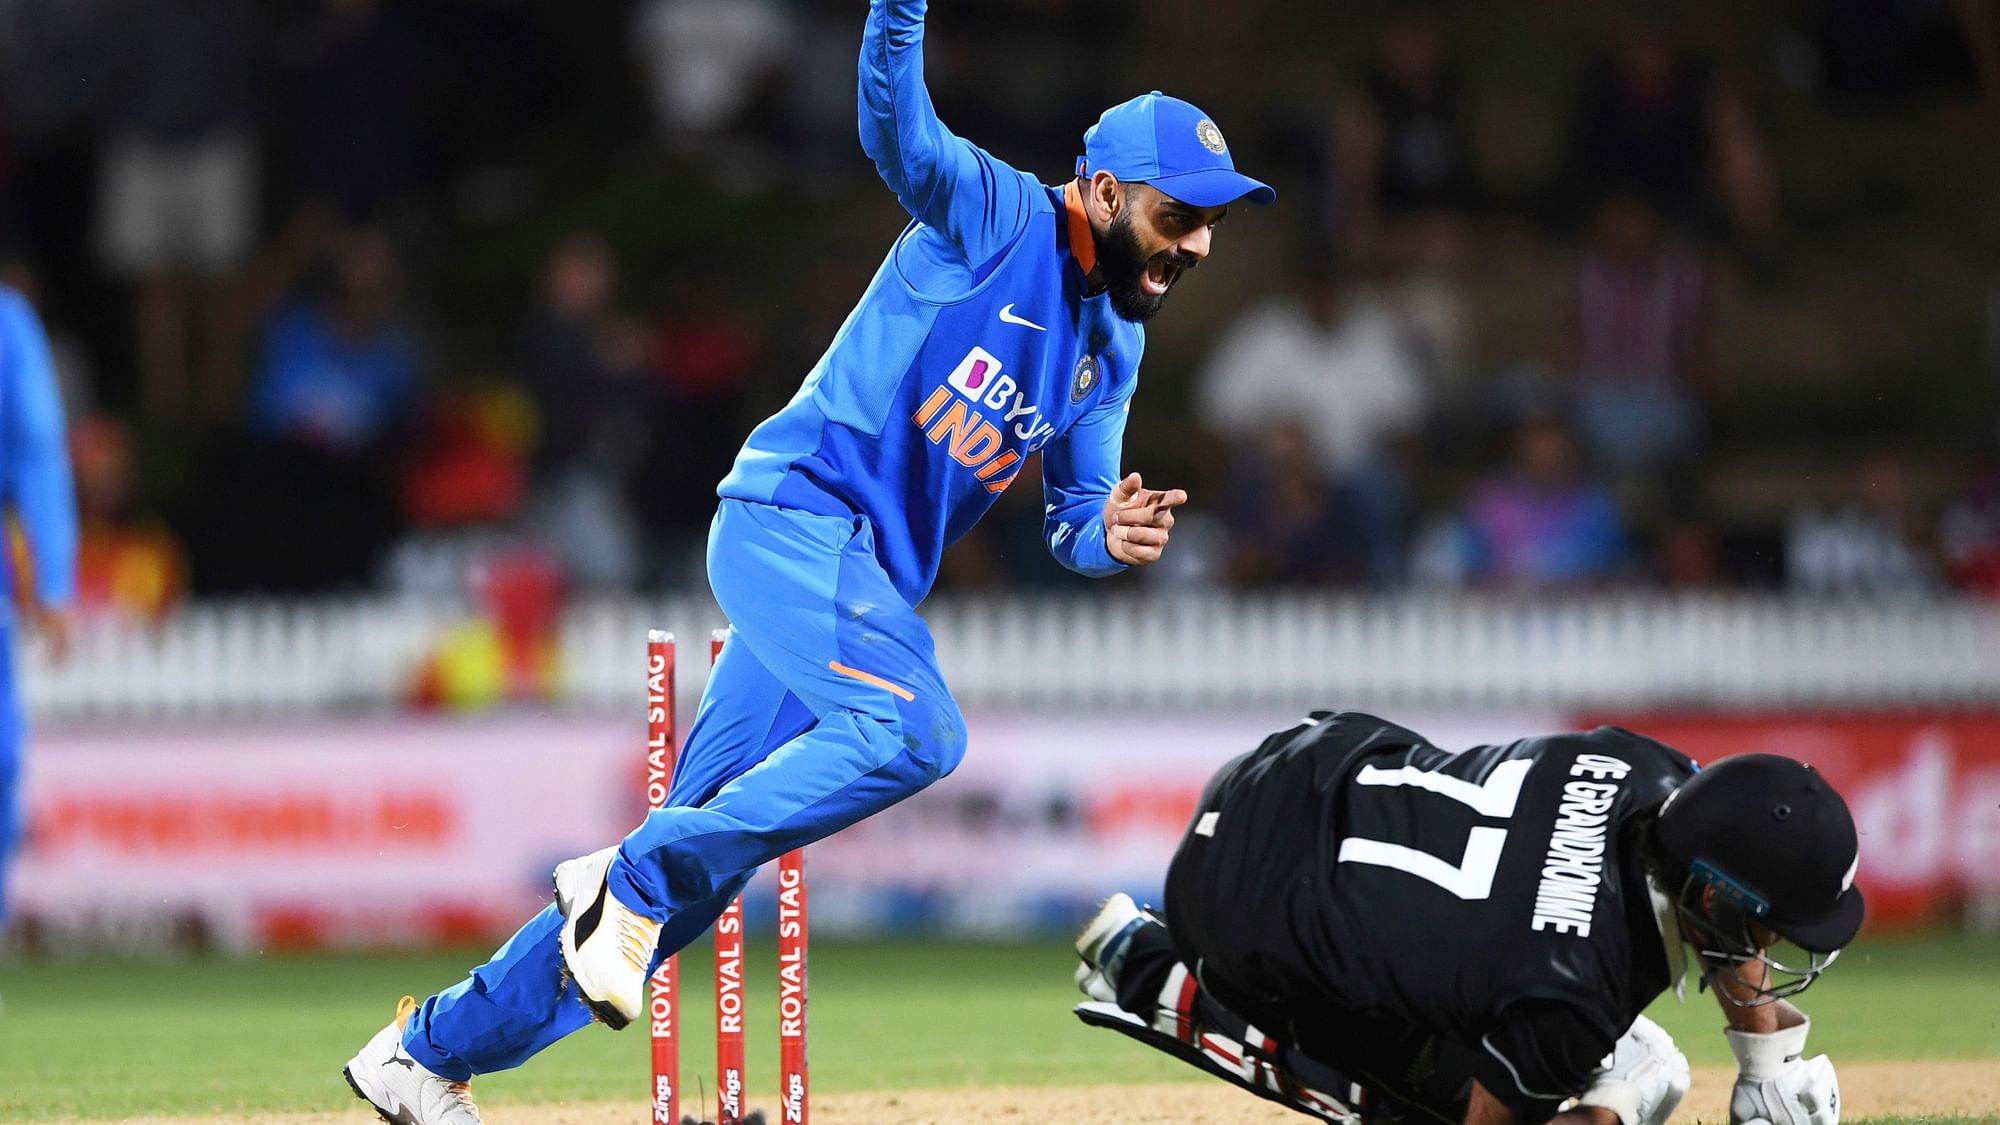 Here are some stats and numbers from the Eden Park stadium in Auckland ahead of India’s second ODI against New Zealand.